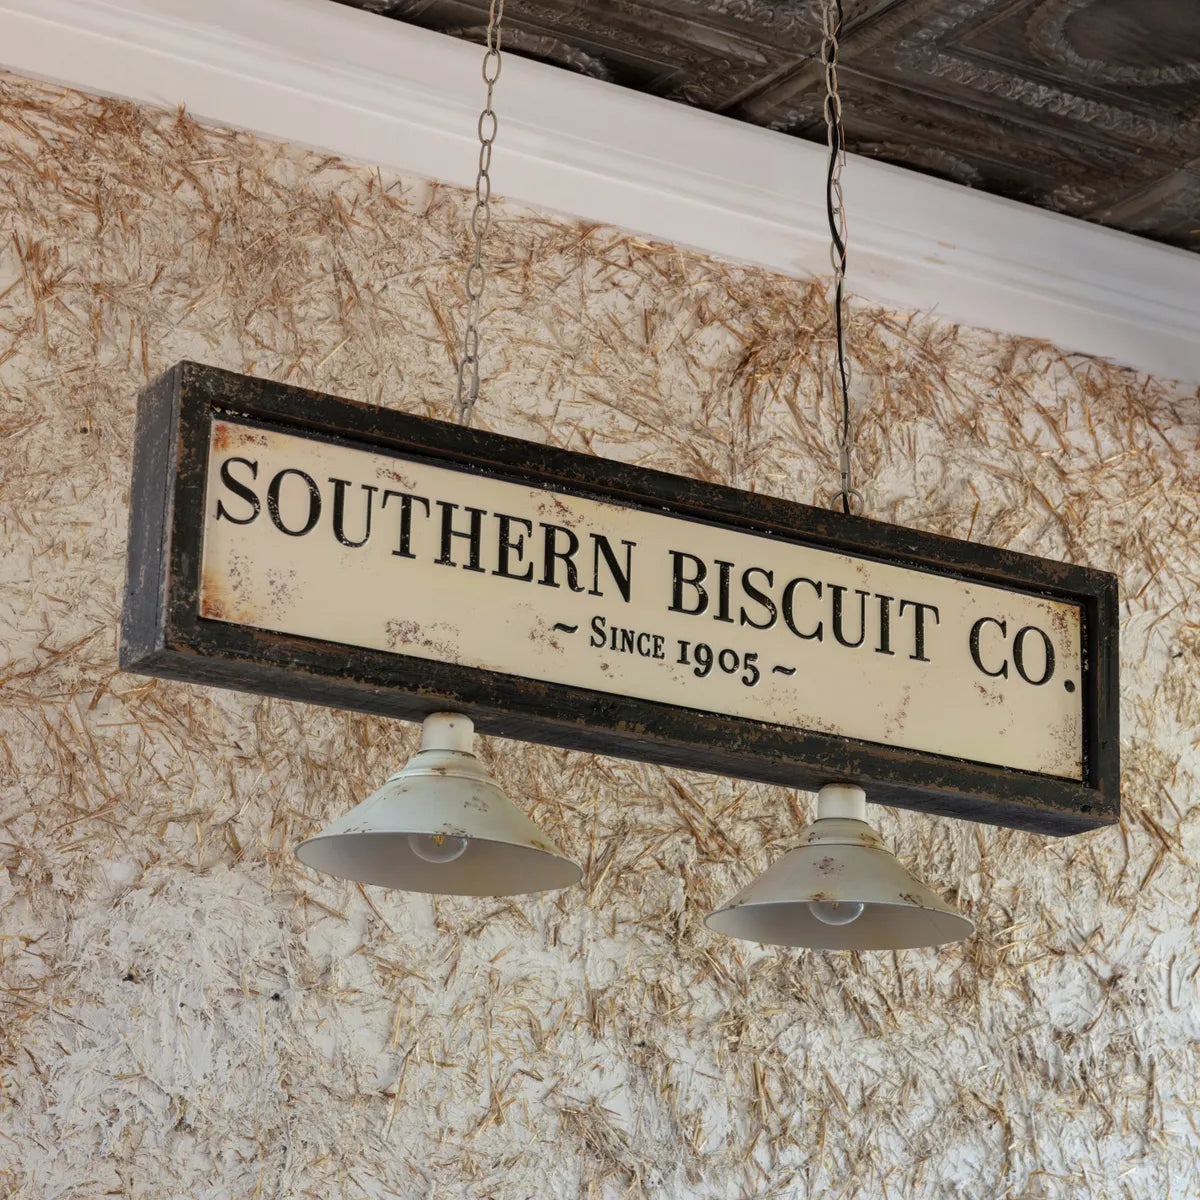 Southern Biscuit Co. Light Fixture